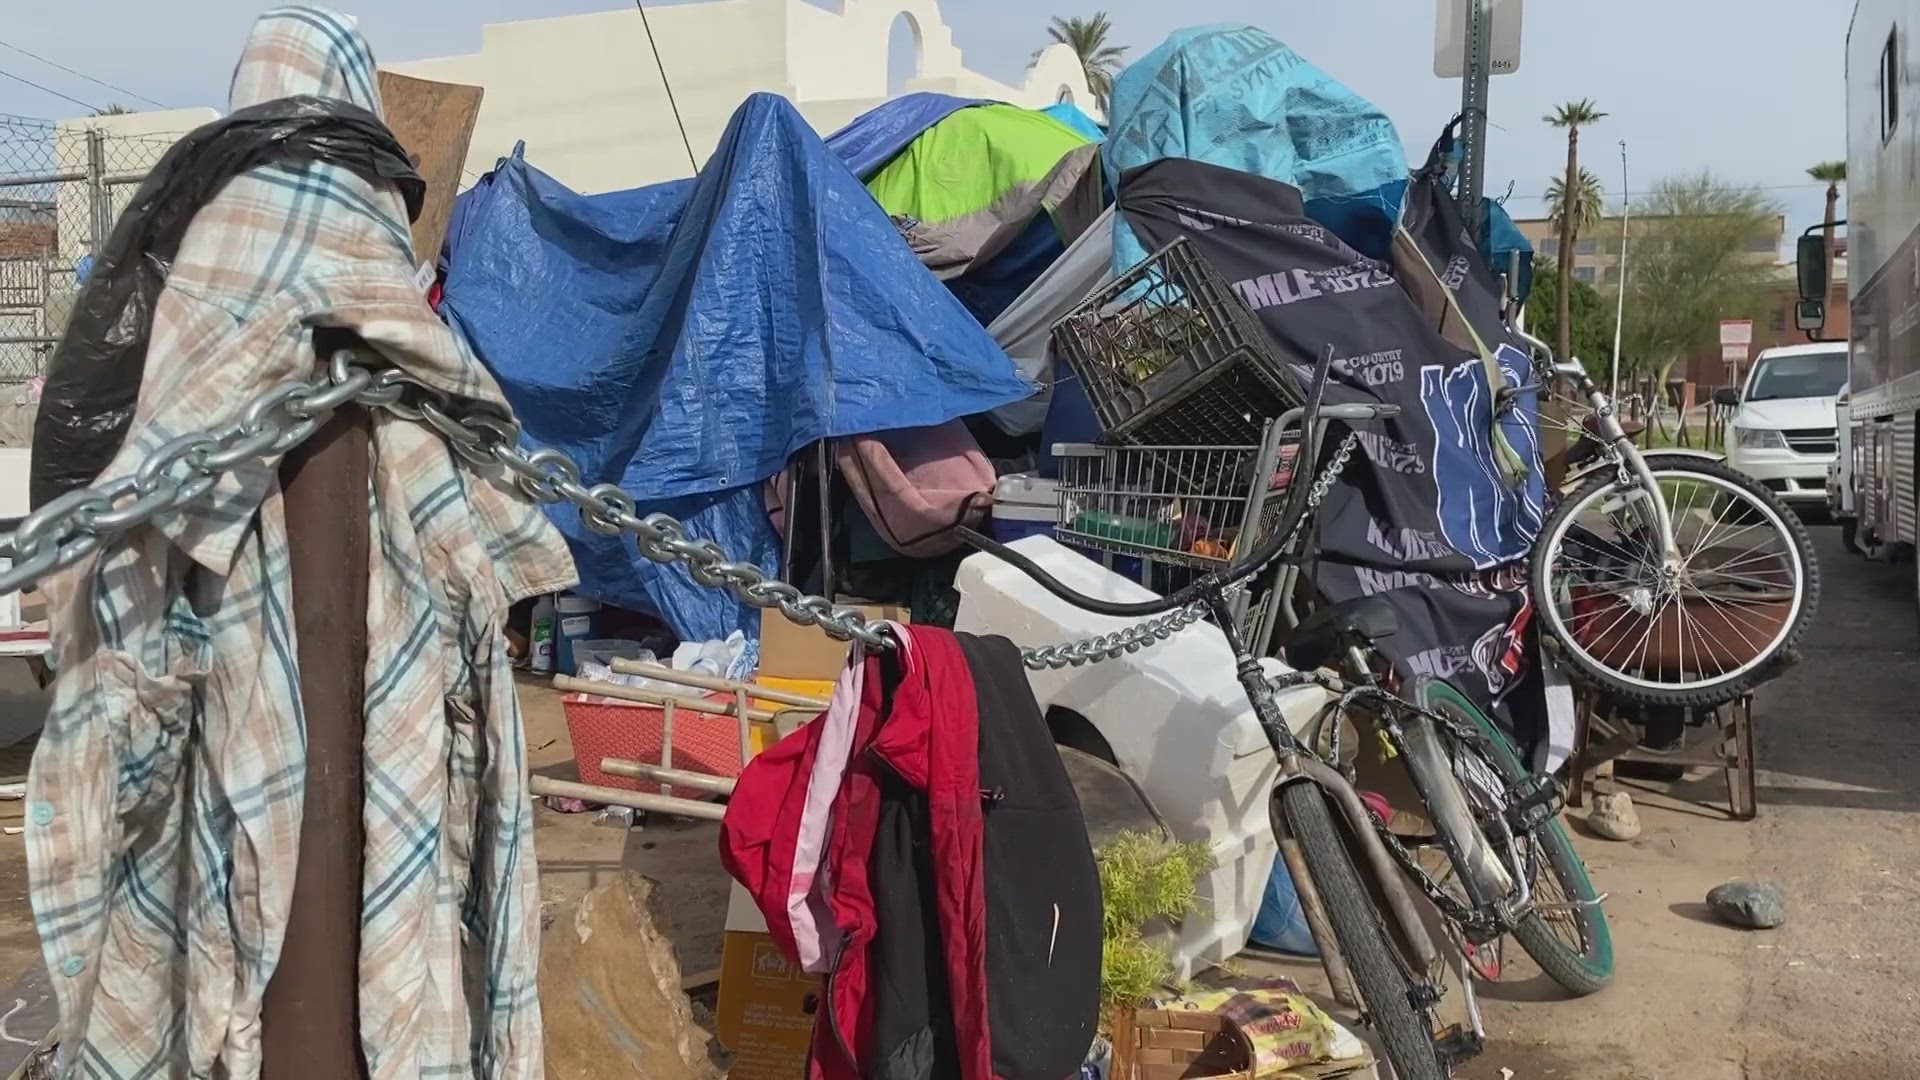 More than 800 people were counted living on the streets in the encampment, according to a tally done by the Human Services Campus Tuesday morning.